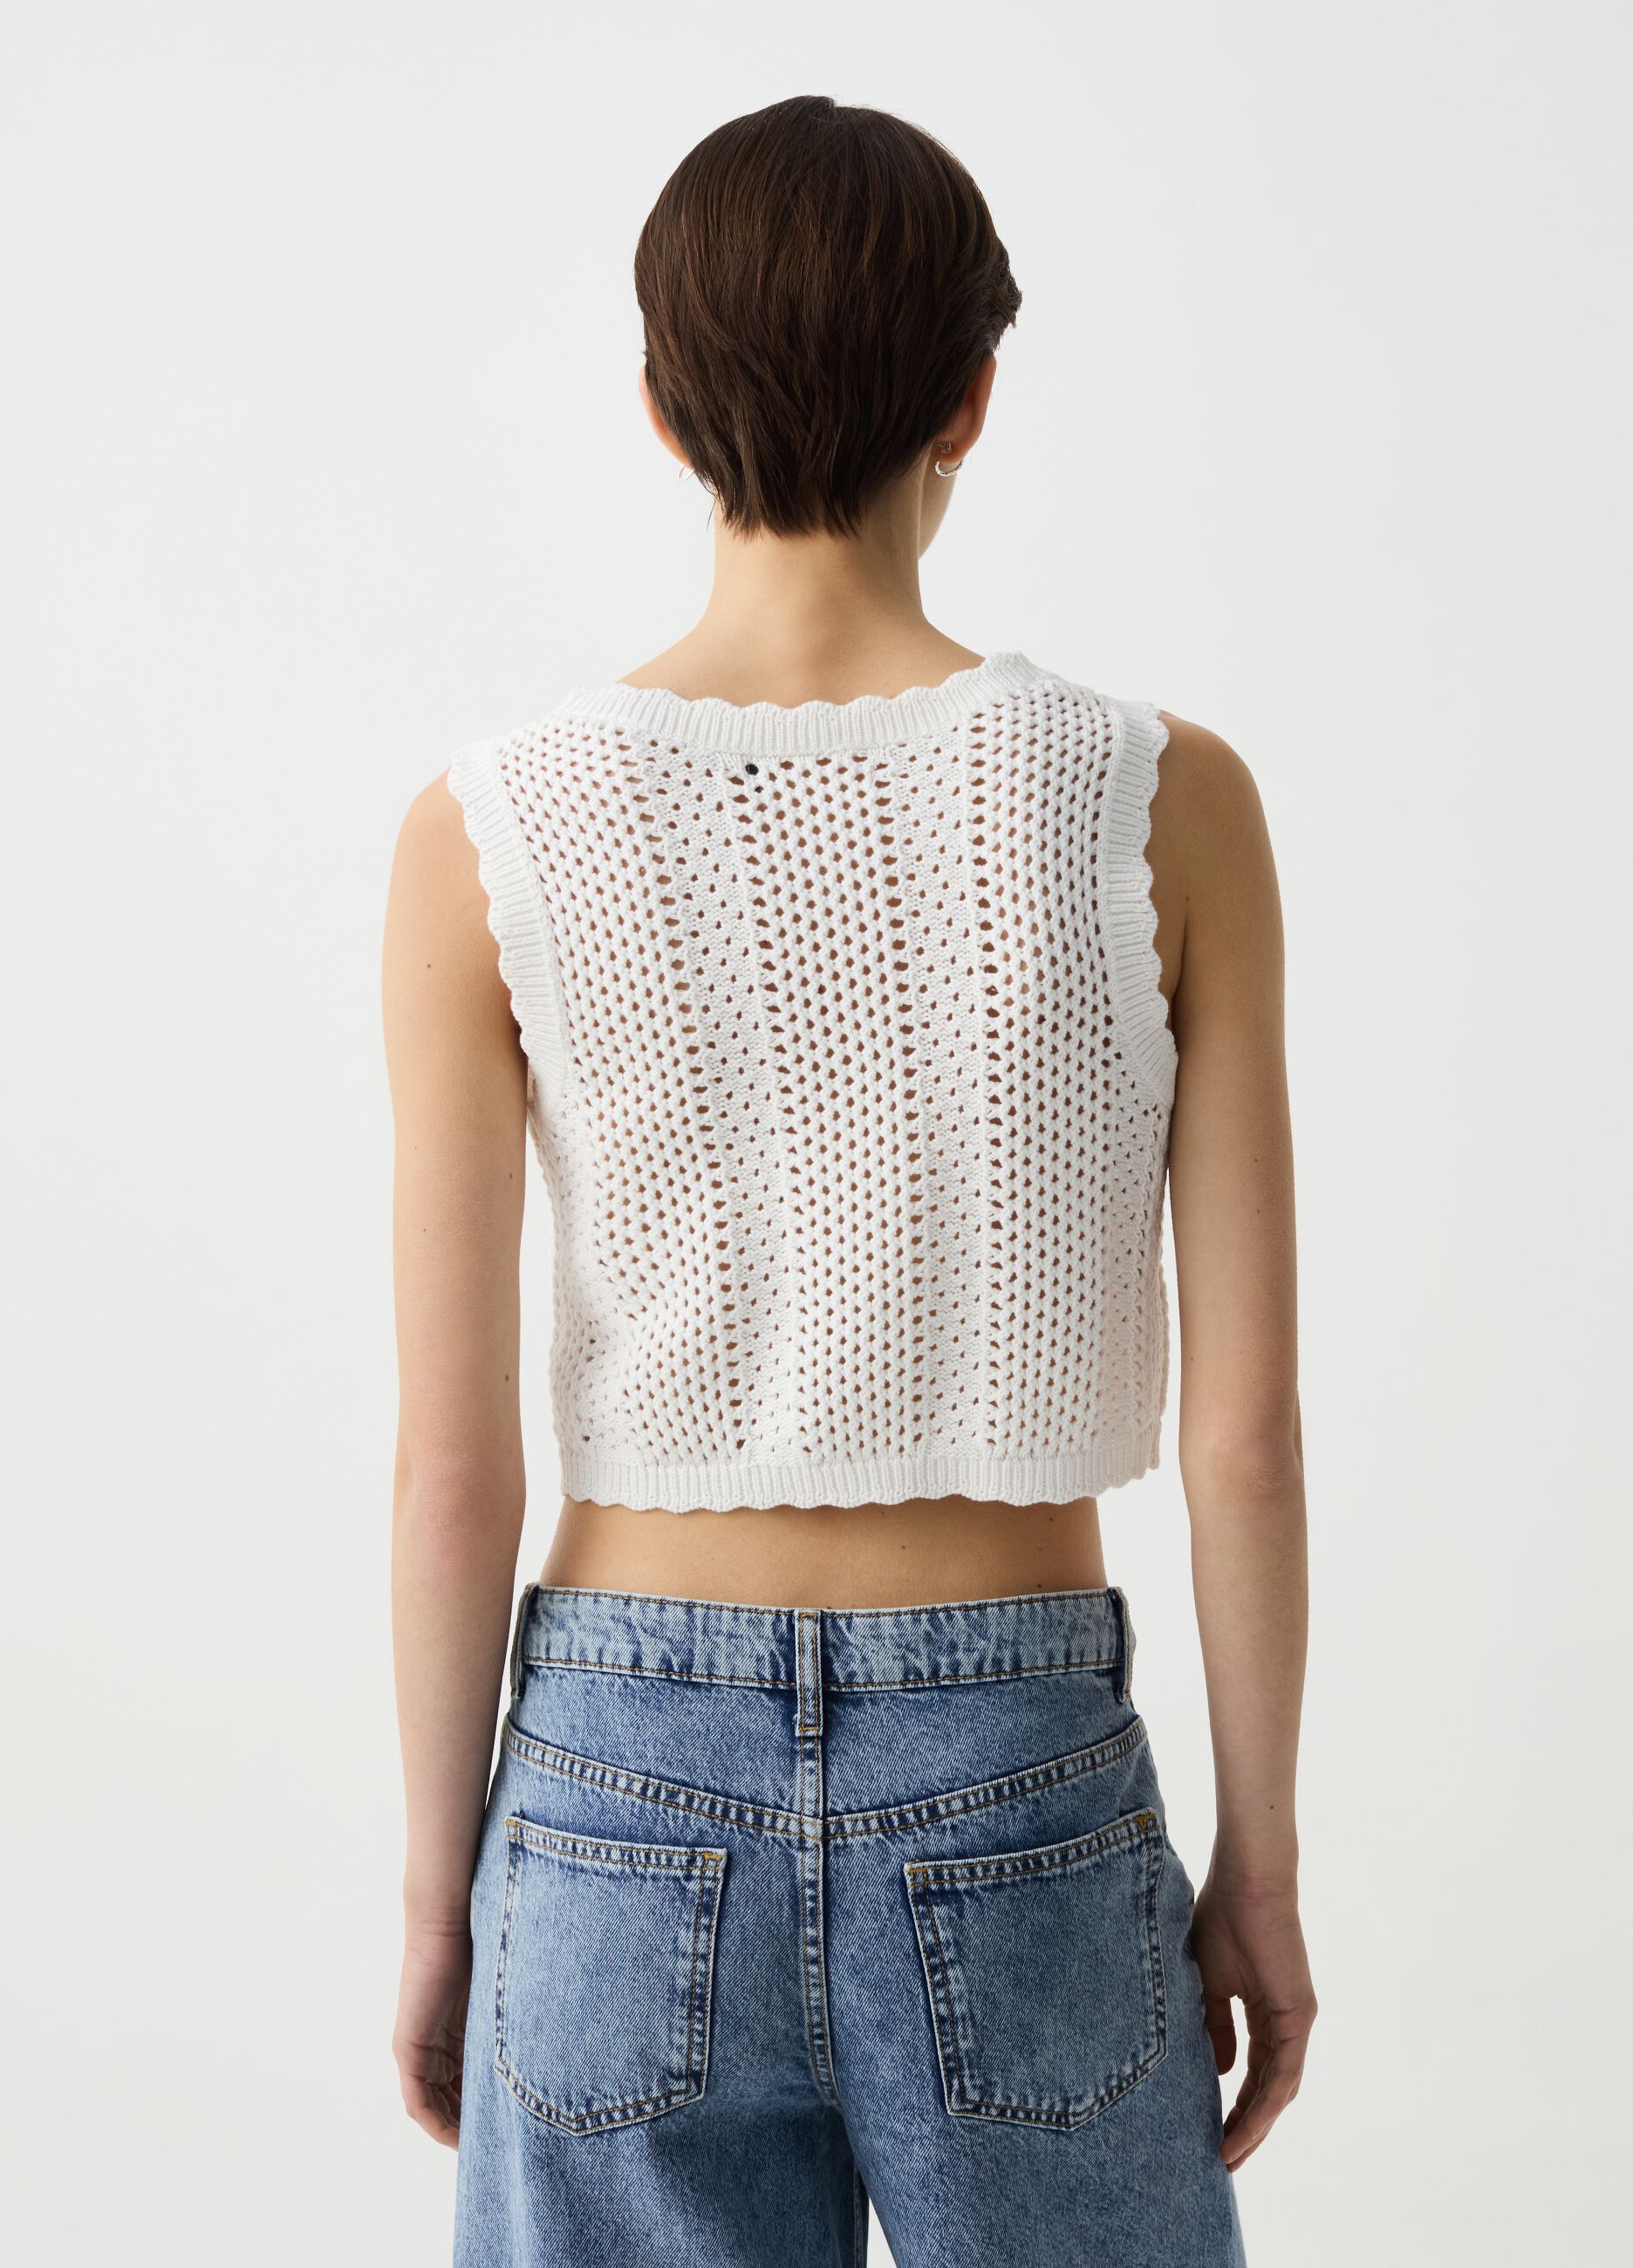 Cropped openwork gilet with wavy edges